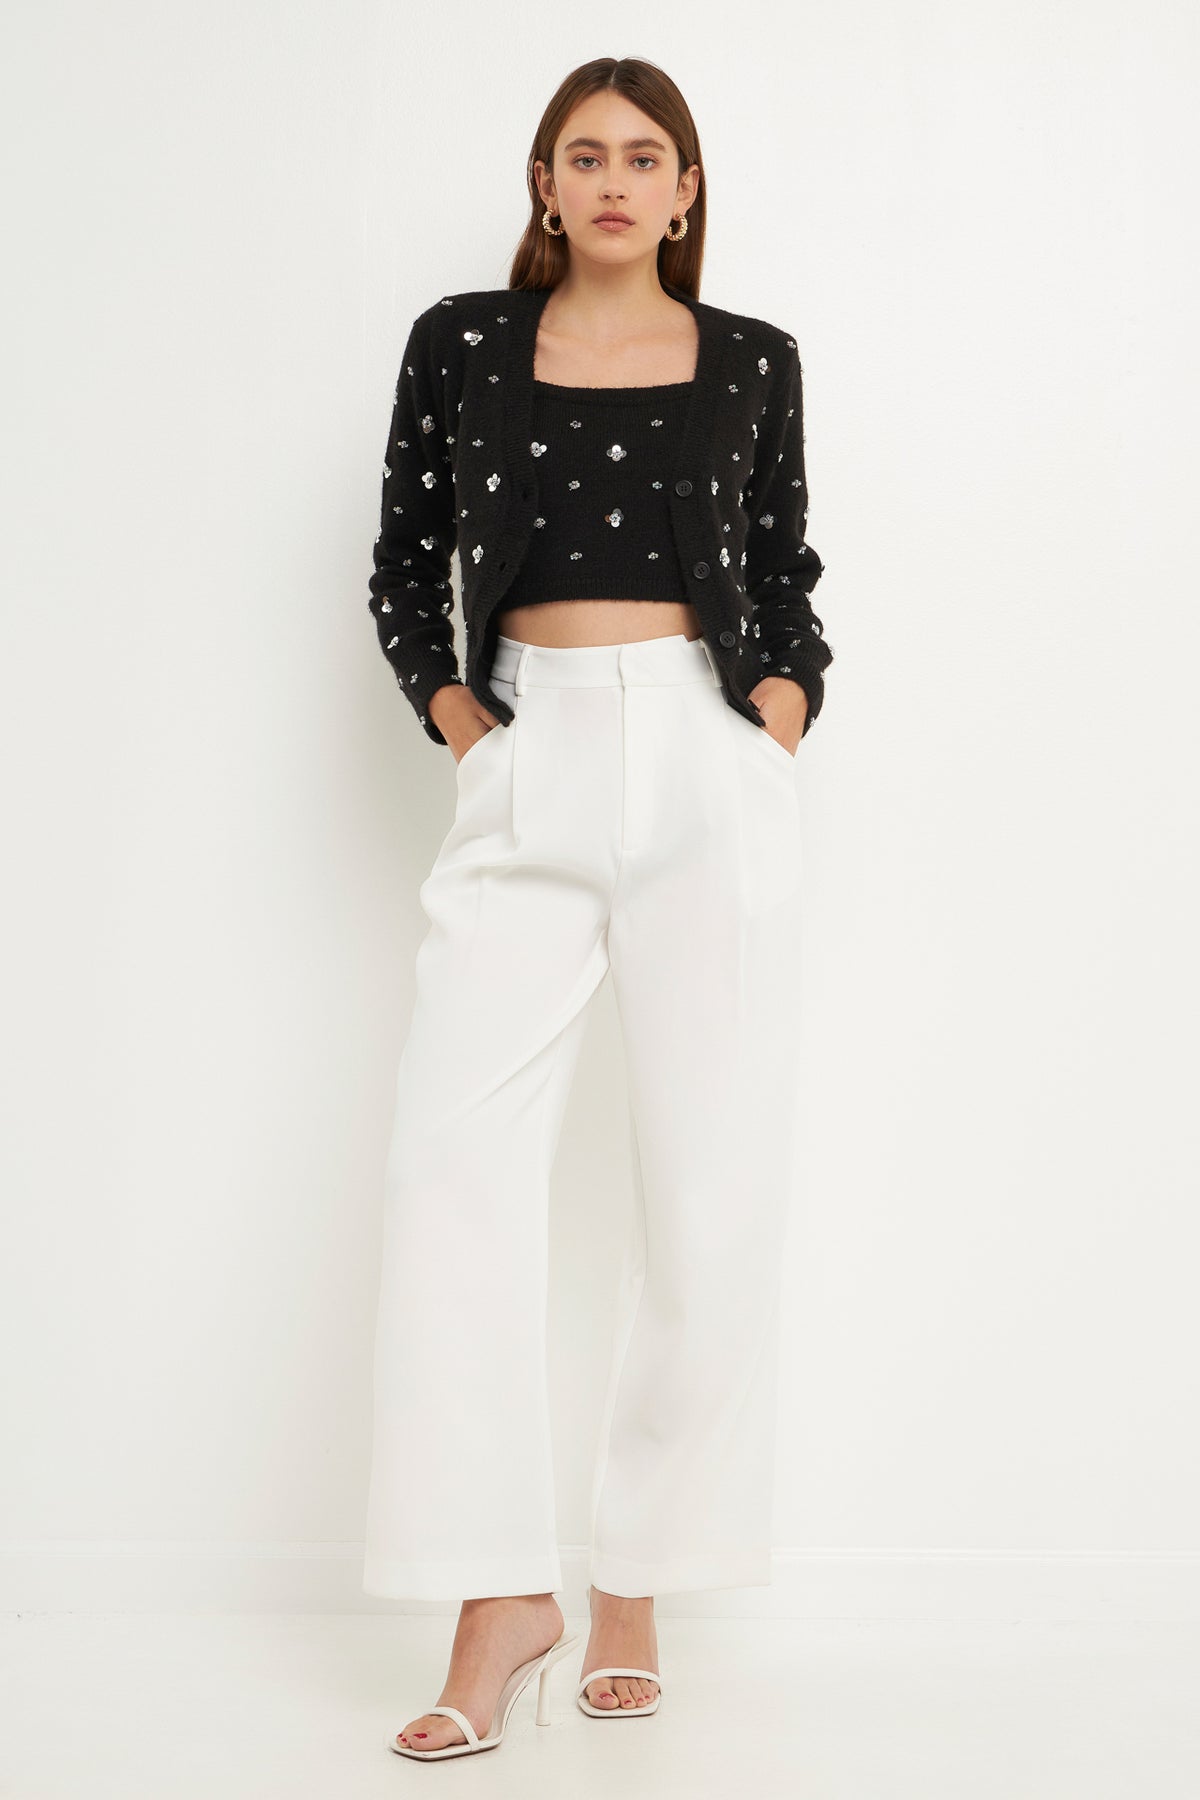 ENDLESS ROSE - Sequin Embellished Cardigan - SWEATERS & KNITS available at Objectrare